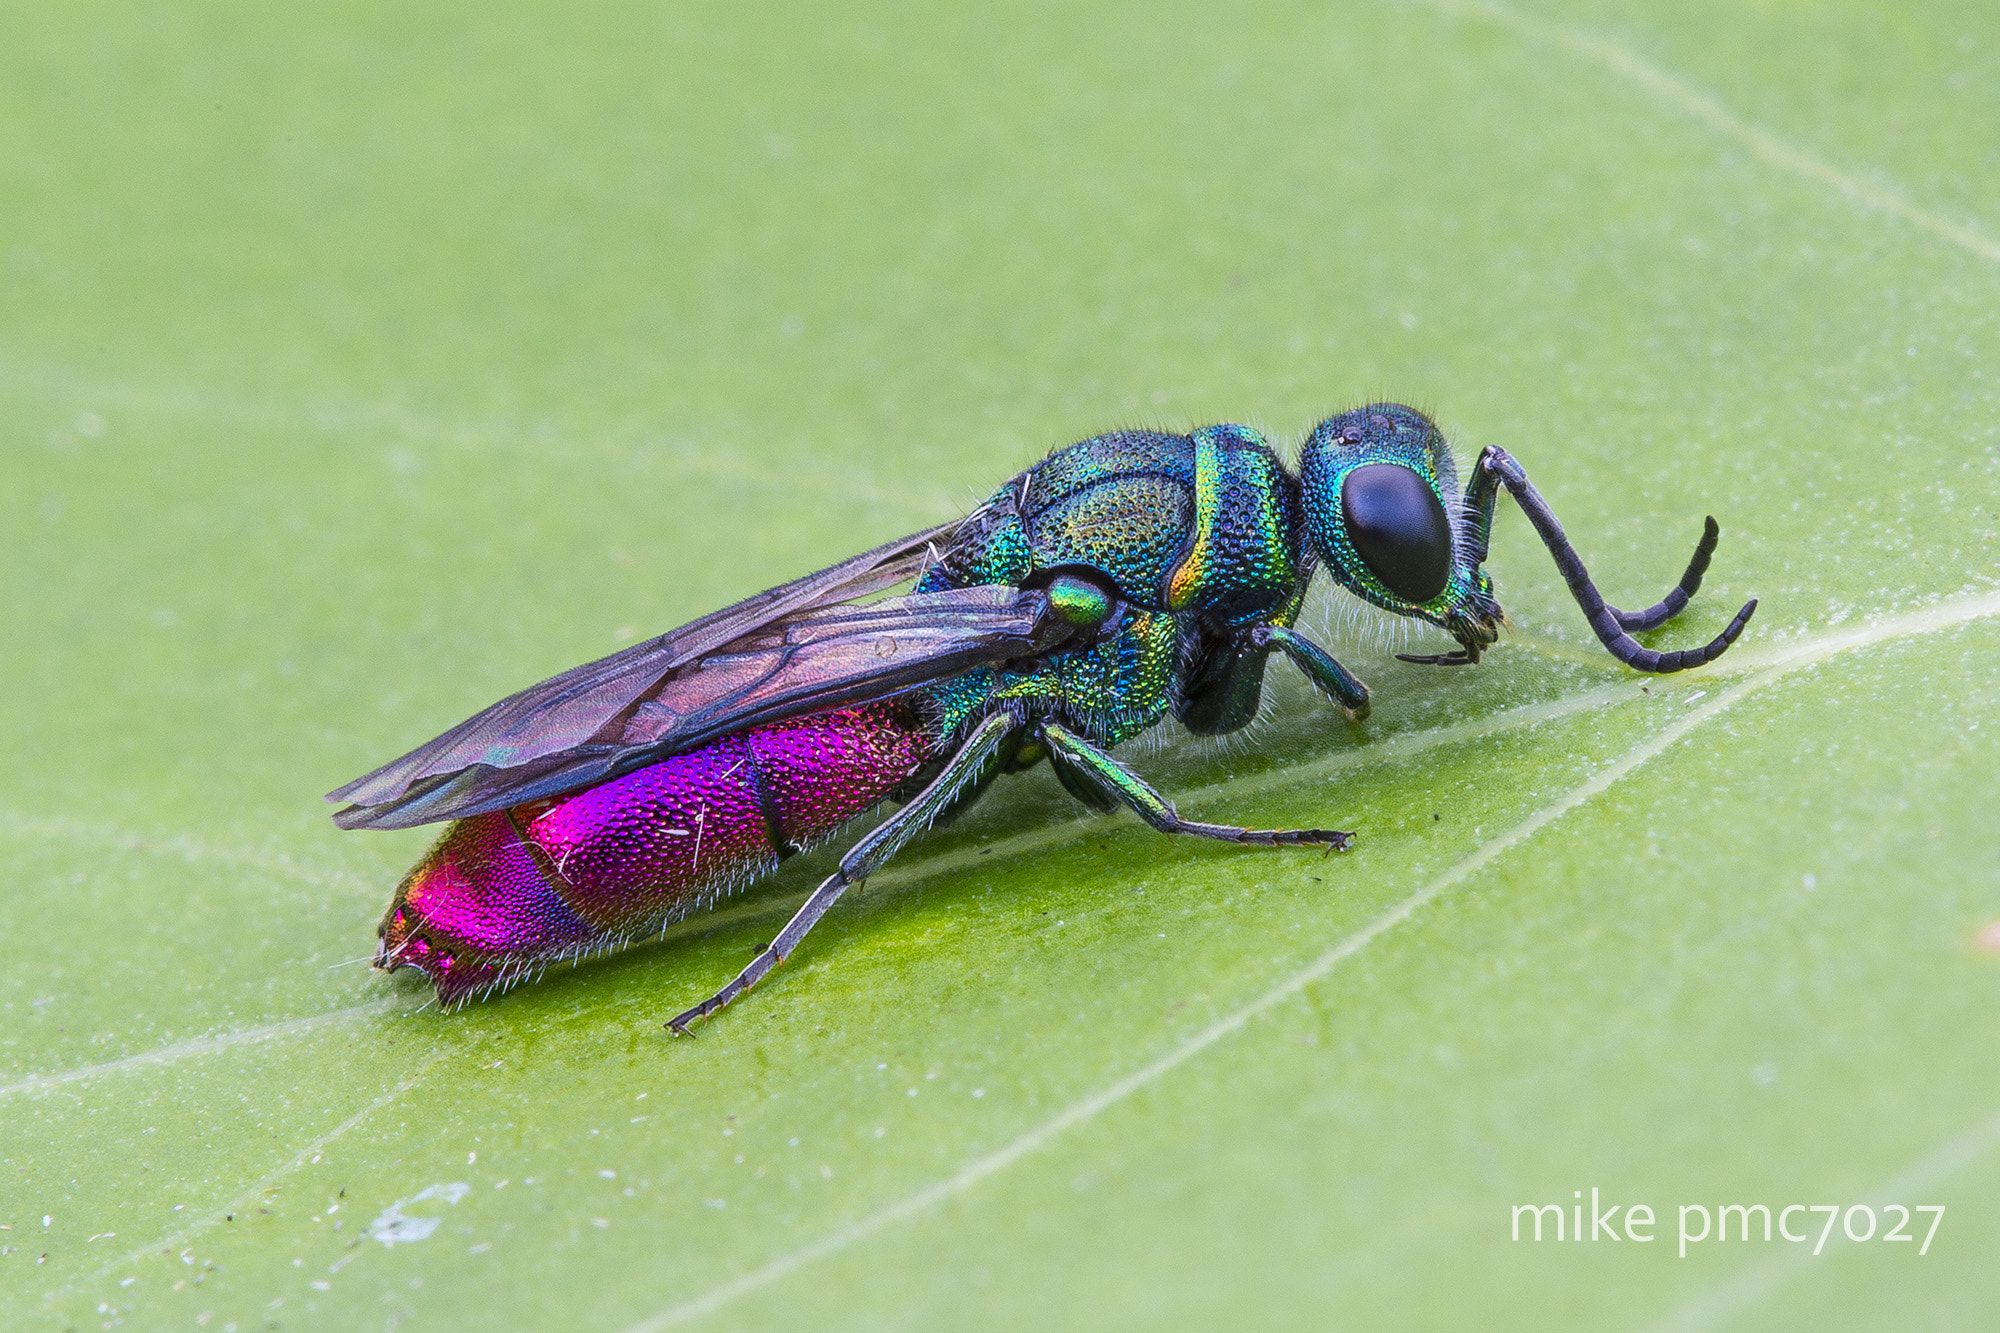 The ruby-tailed wasp - Chrysis ignita | World of insects and flowers ...